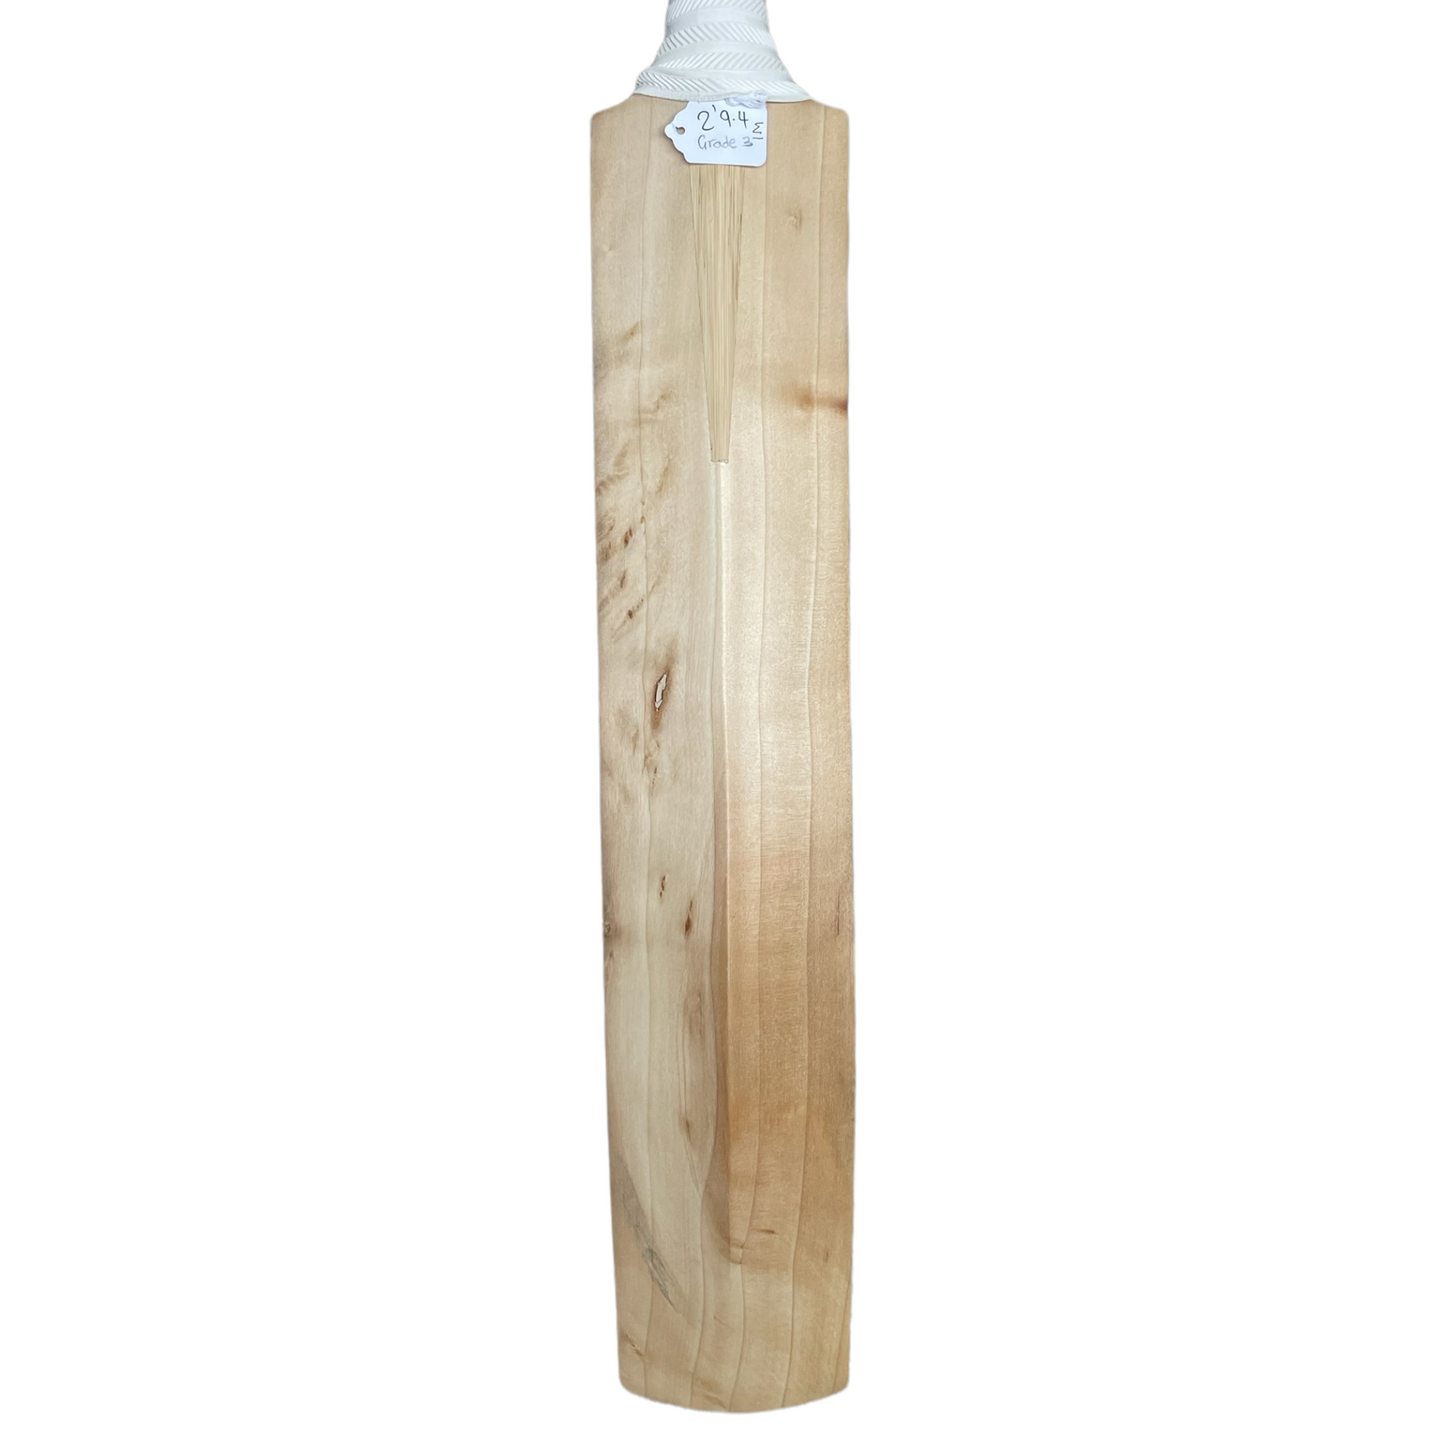 Plain Handmade English Willow Cricket Bats No stickers Discounted price Bargain Price Great deal Best price Lowest price Brighton and Hove Sussex Surrey hampshire Kent London Grade 3